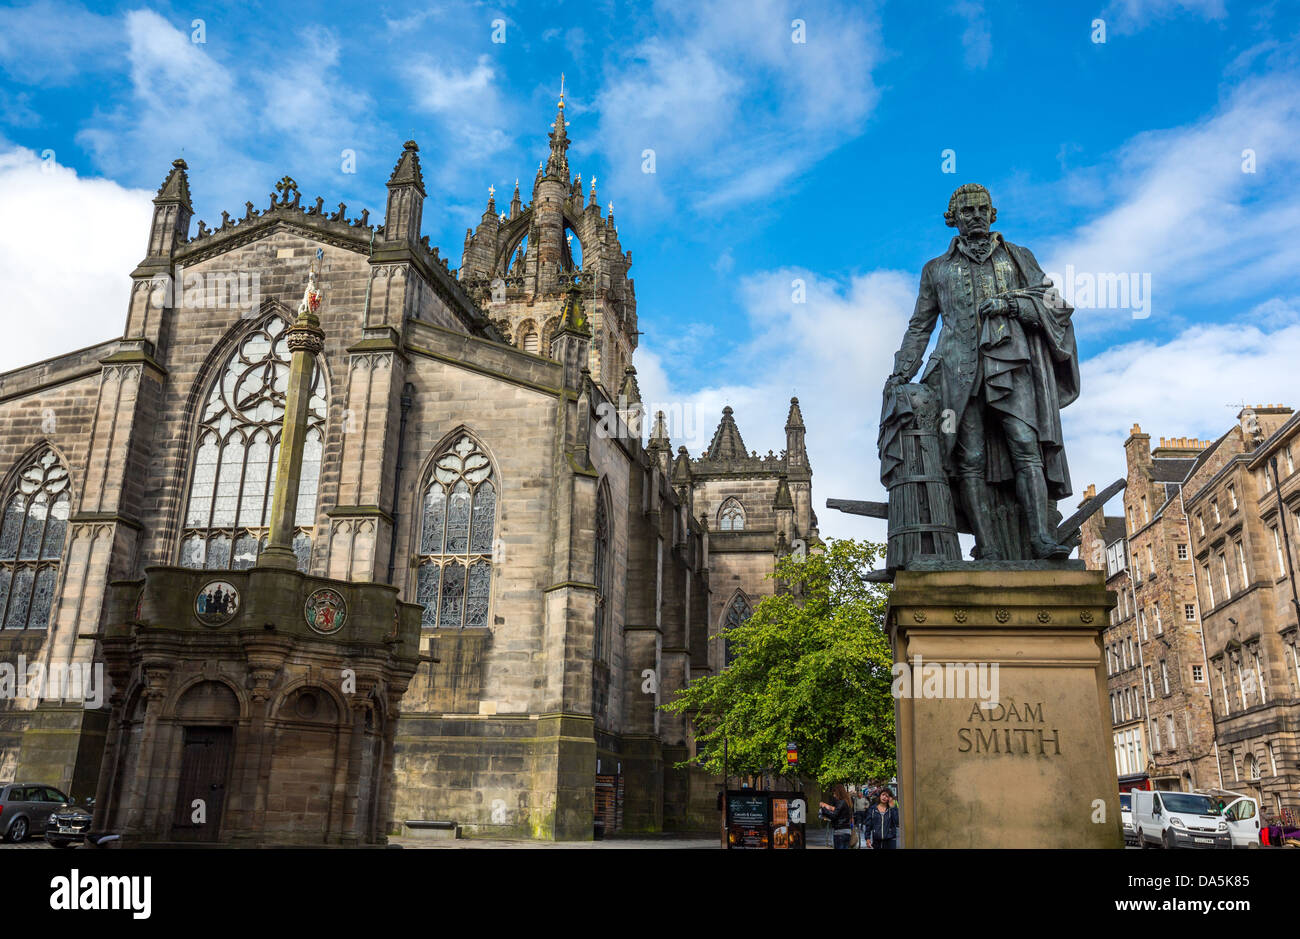 Great Britain, Scotland, Edinburgh, The Royal Mile, the apse of the St Giles Cathedral and the monument to Adam Smith. Stock Photo